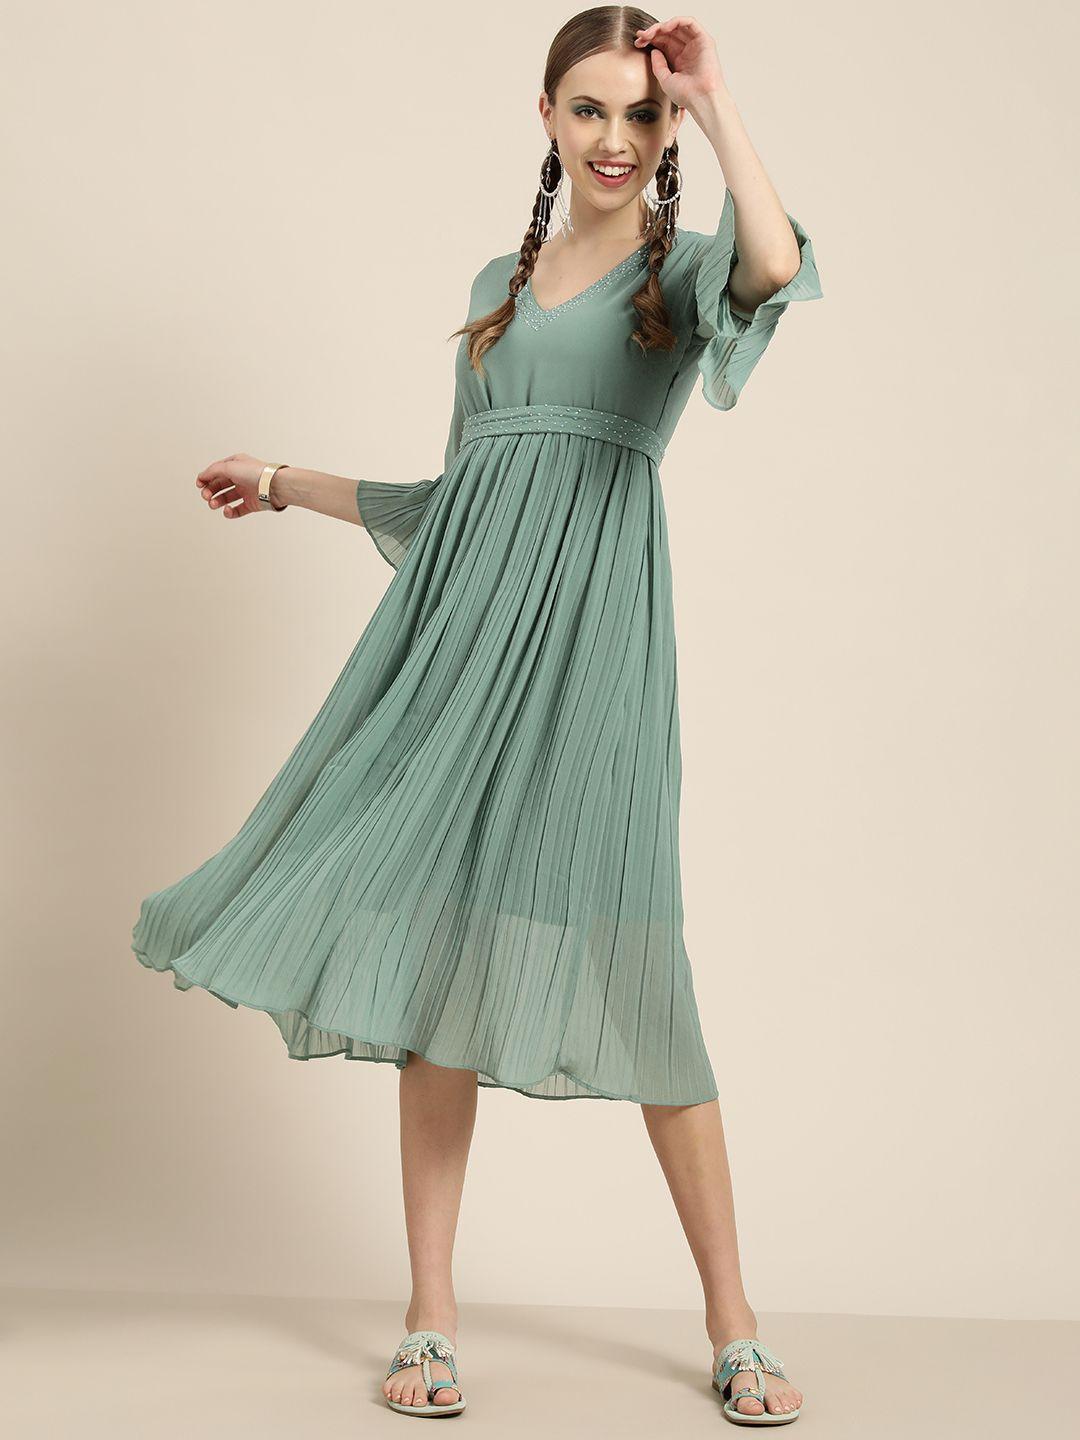 sangria women sea green embellished detail a-line dress comes with a belt